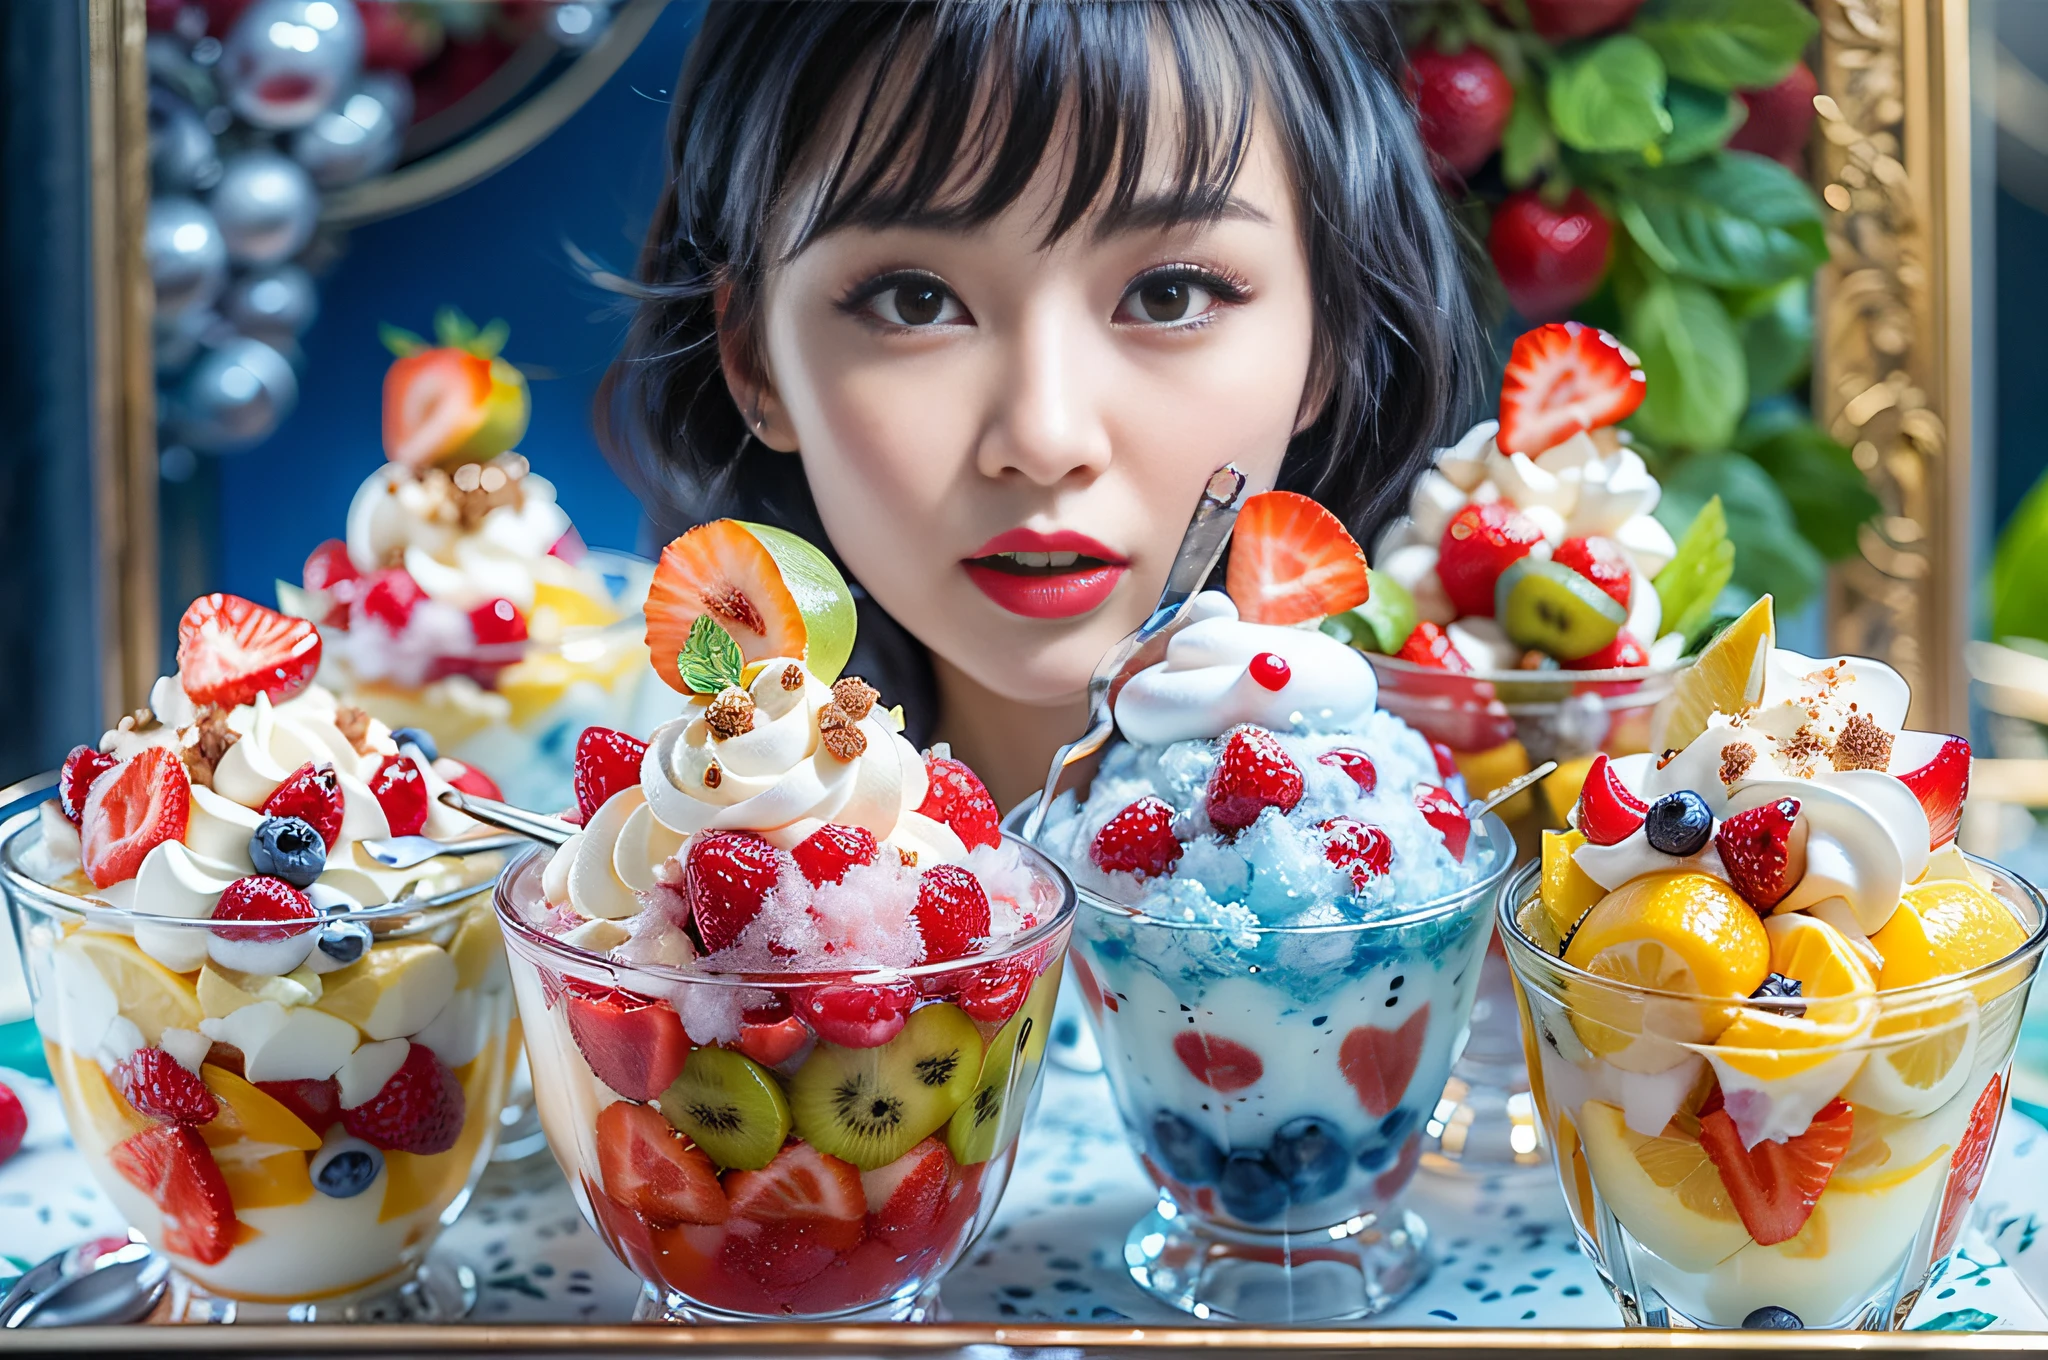 (Masterpiece), (intriciate detail), (Photorealistic:1.3), 1 cute Japanese model, Elegant magazine advertising model, Posing with mixed fruit Parfait, A mixture of fruits and ice cream with shaved ice, in Angled crystal glasses, Topped with strawberries and cream, universe, Marine Blue Theme, dramatic lighting, Spoon, pieces of ice, fruits,